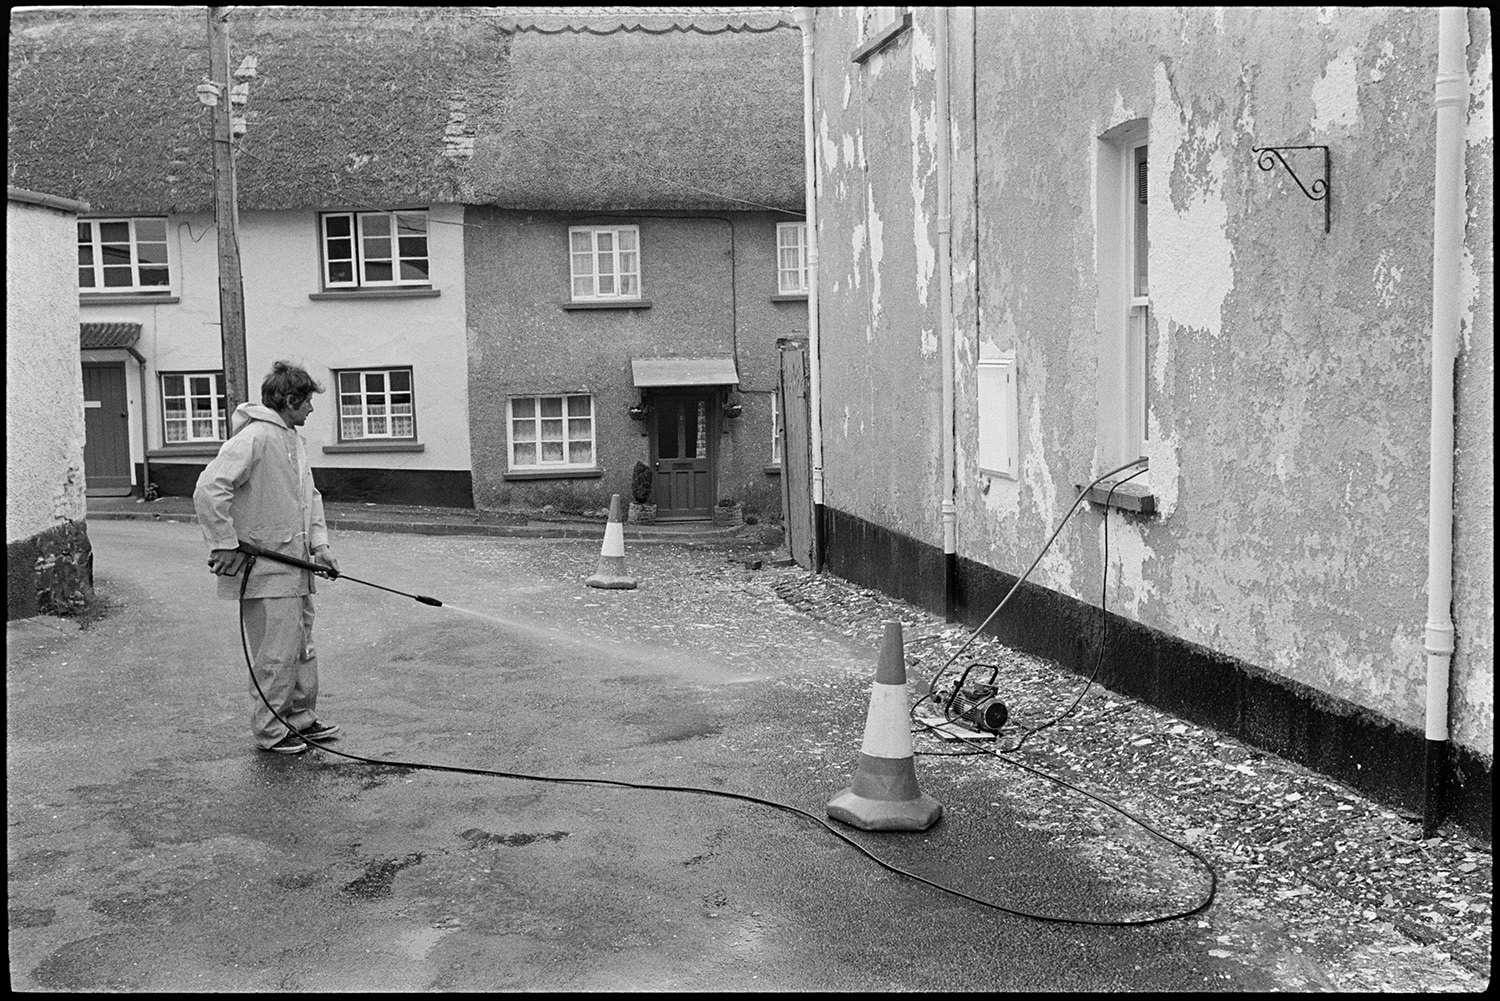 Man cleaning house with high pressure jet of water.
[A man dressed in waterproofs using a pressure washer to wash the walls of Peel House, Chulmleigh. The hose can be seen coming out of a ground floor window. Two thatched cottages are visible in the background.]